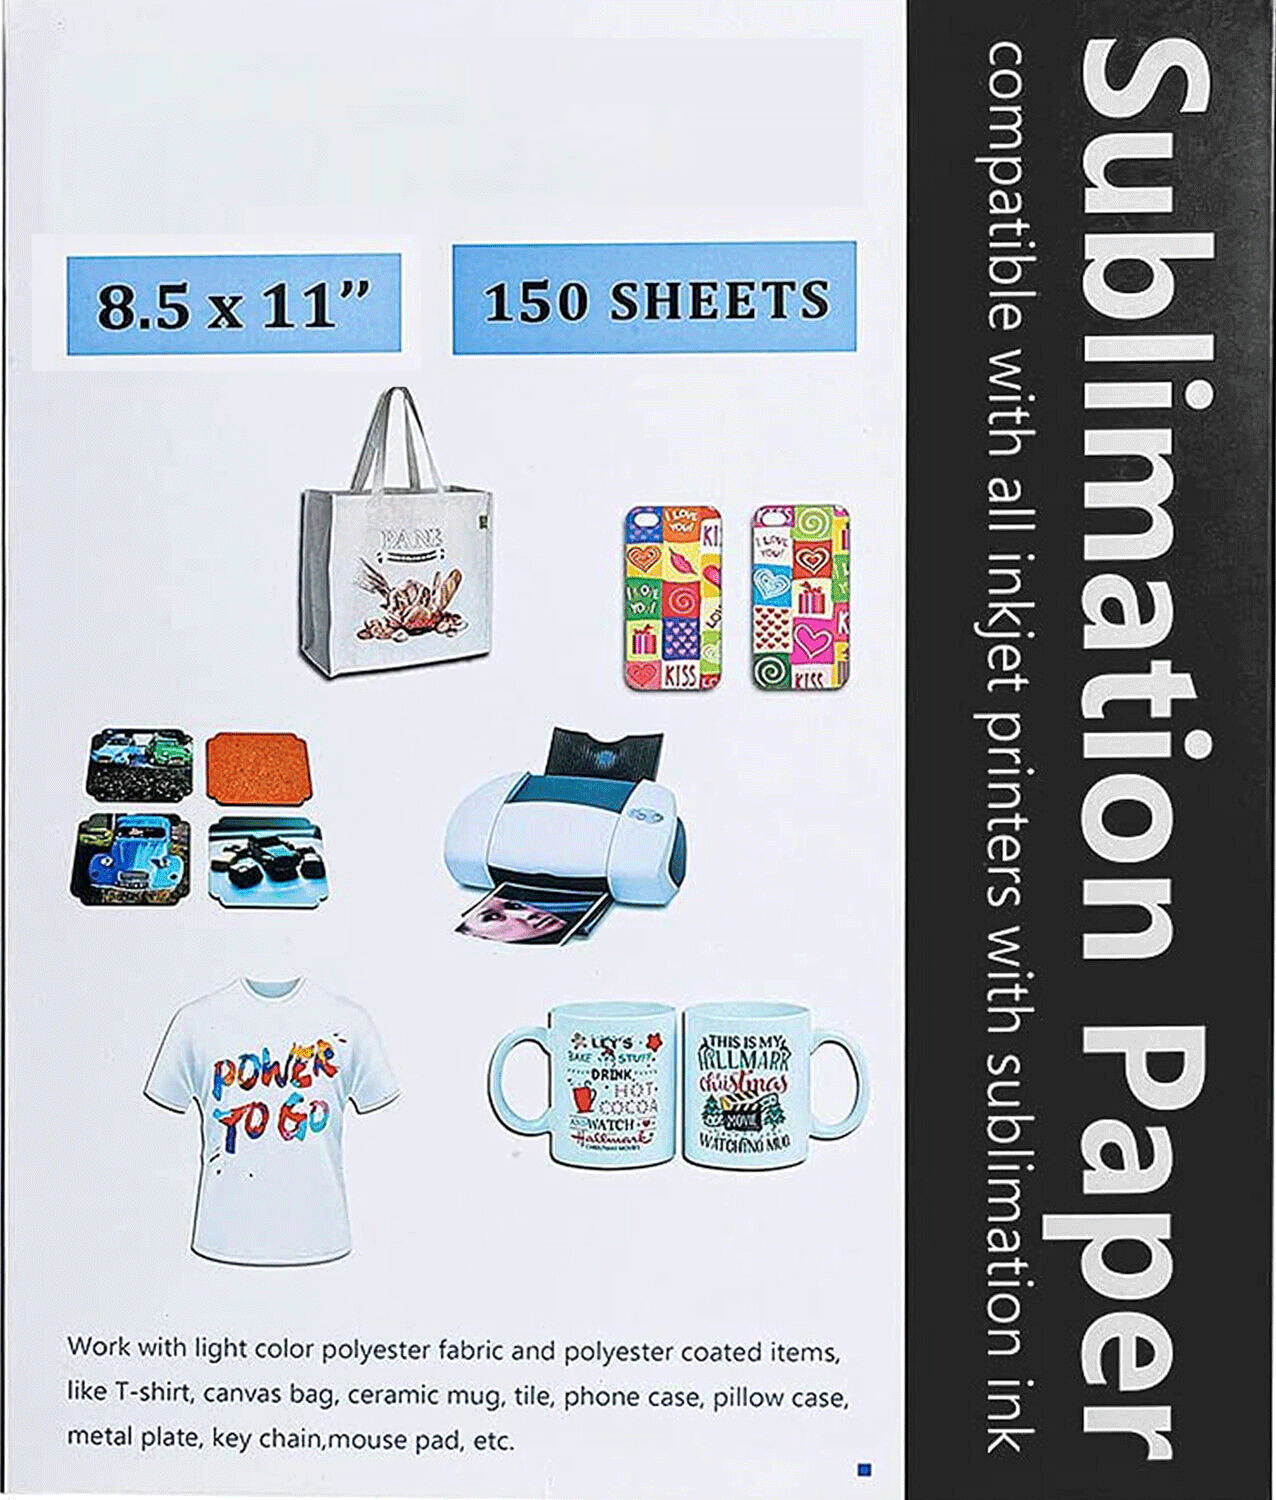 HTVRONT 150 Sheets A4（US）8.5 x 11 inches Sublimation Paper Heat